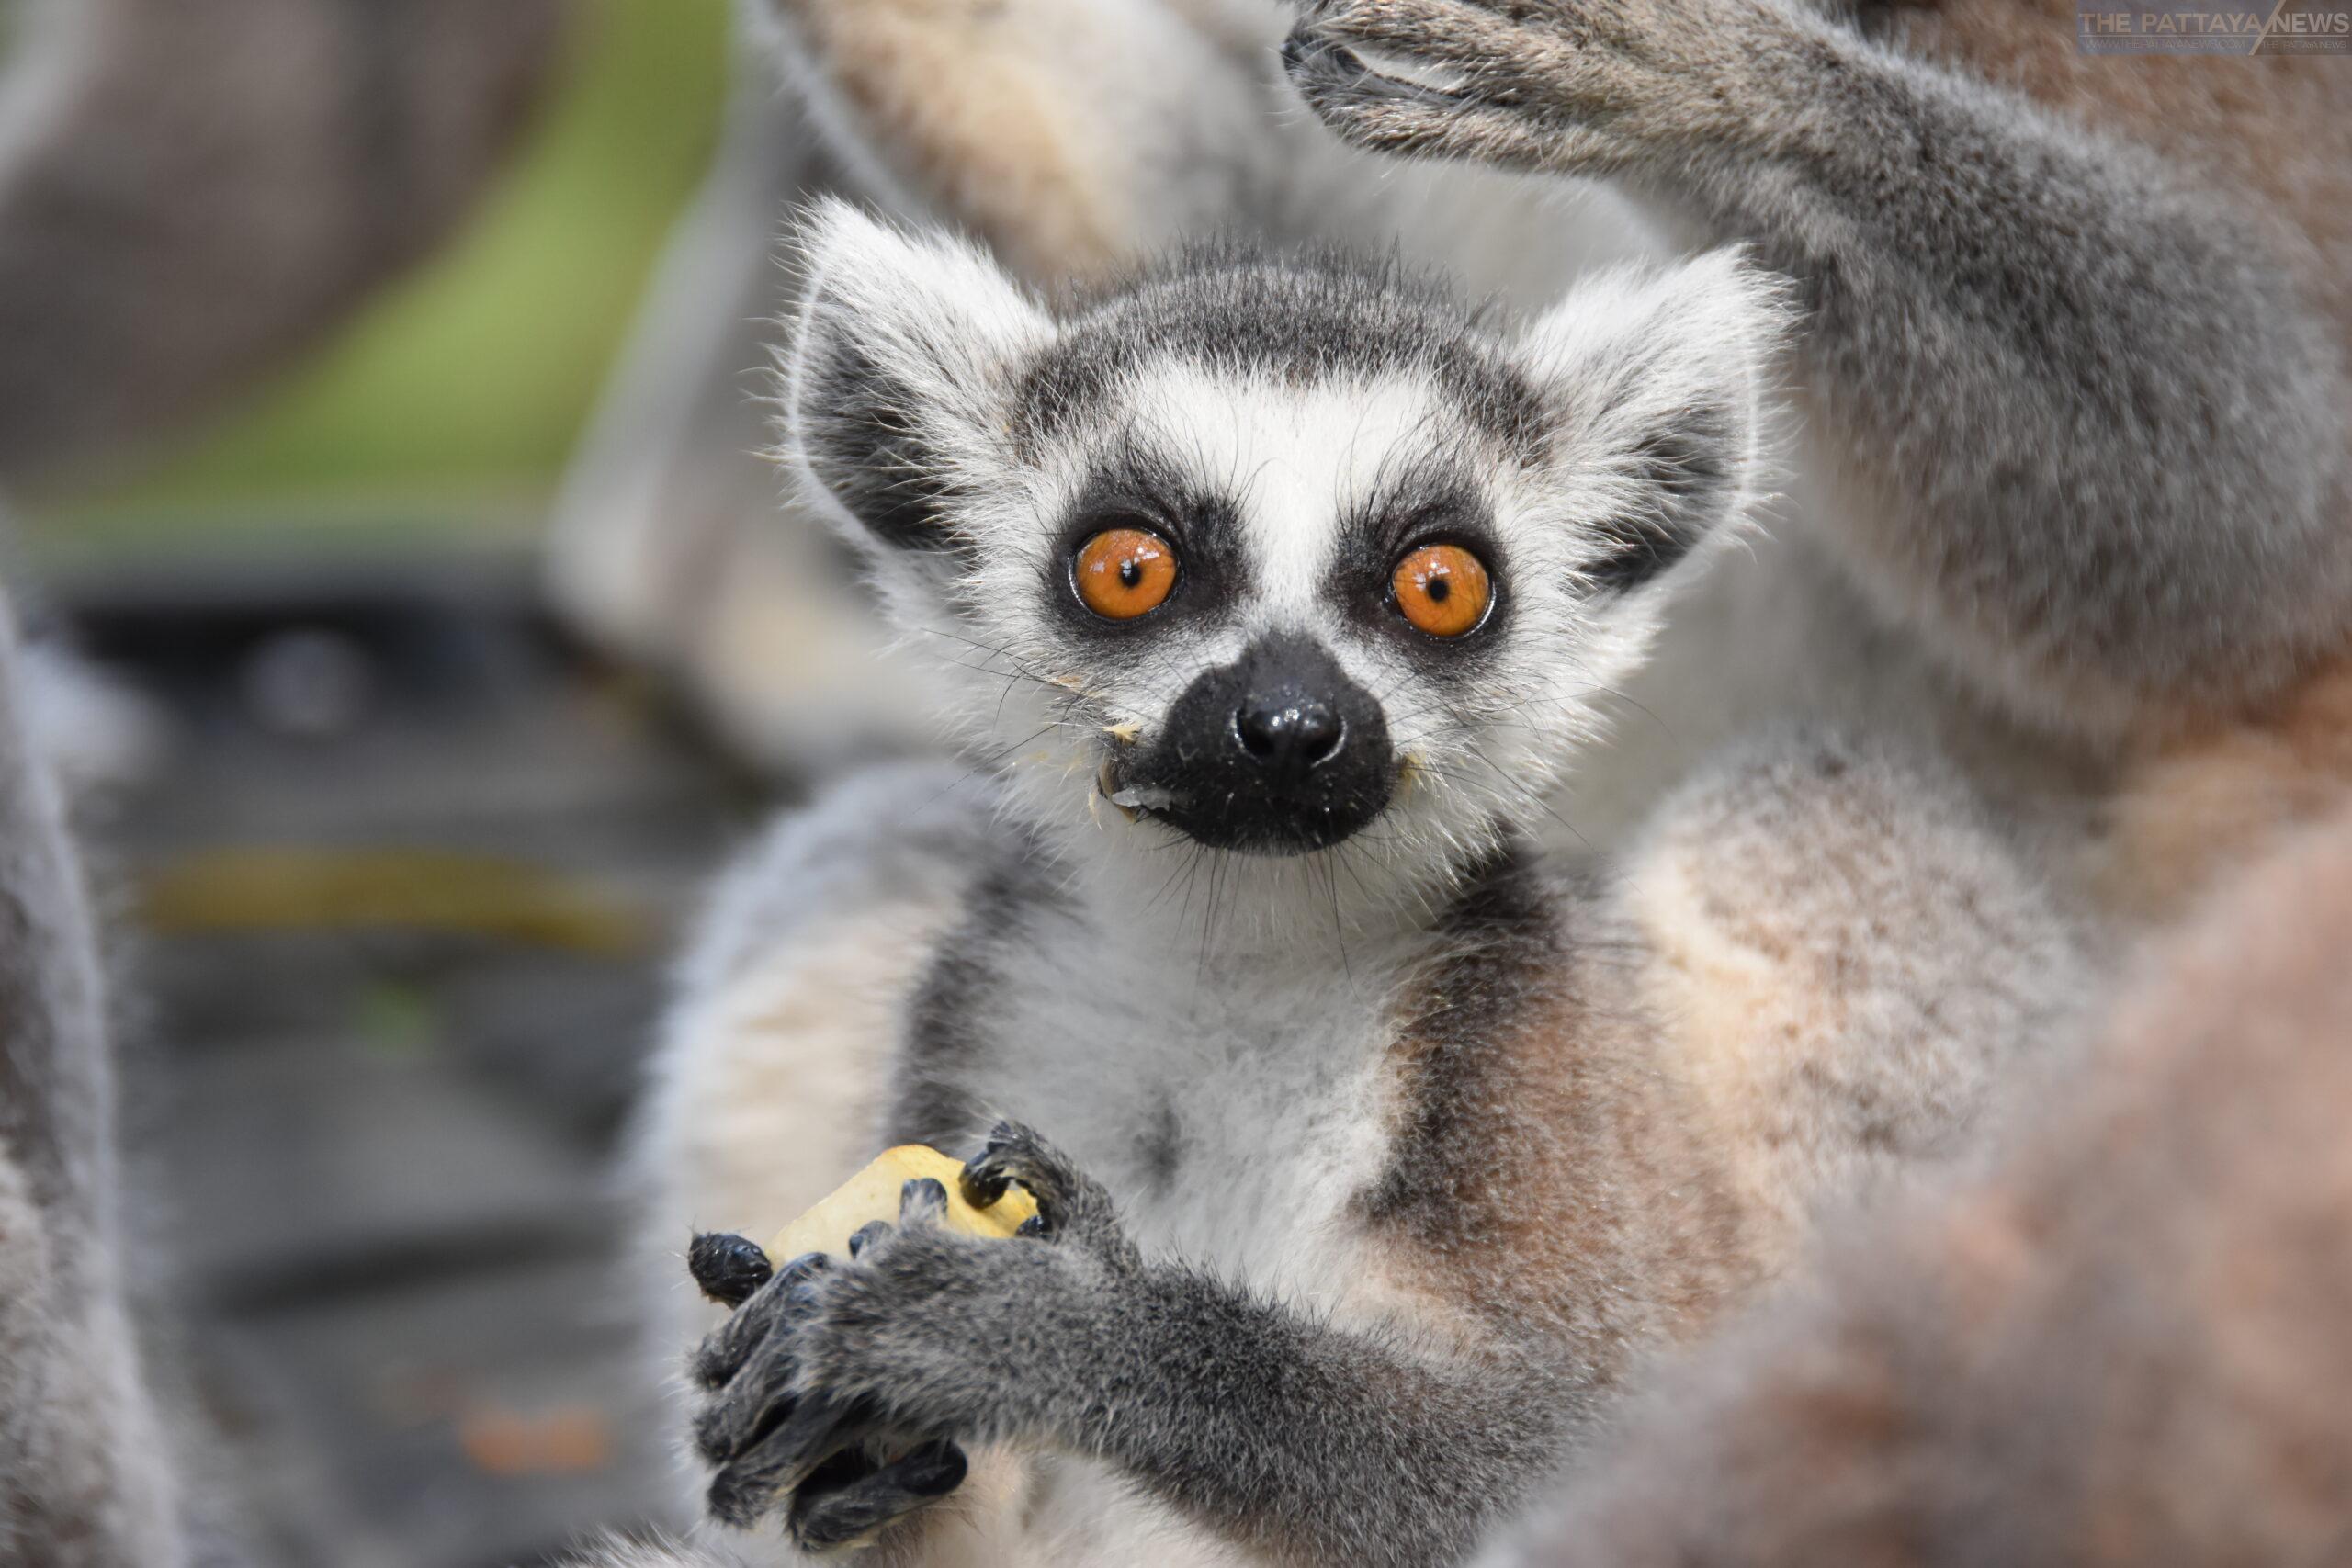 Khao Kheow Open Zoo debuts a new baby ring-tailed lemur